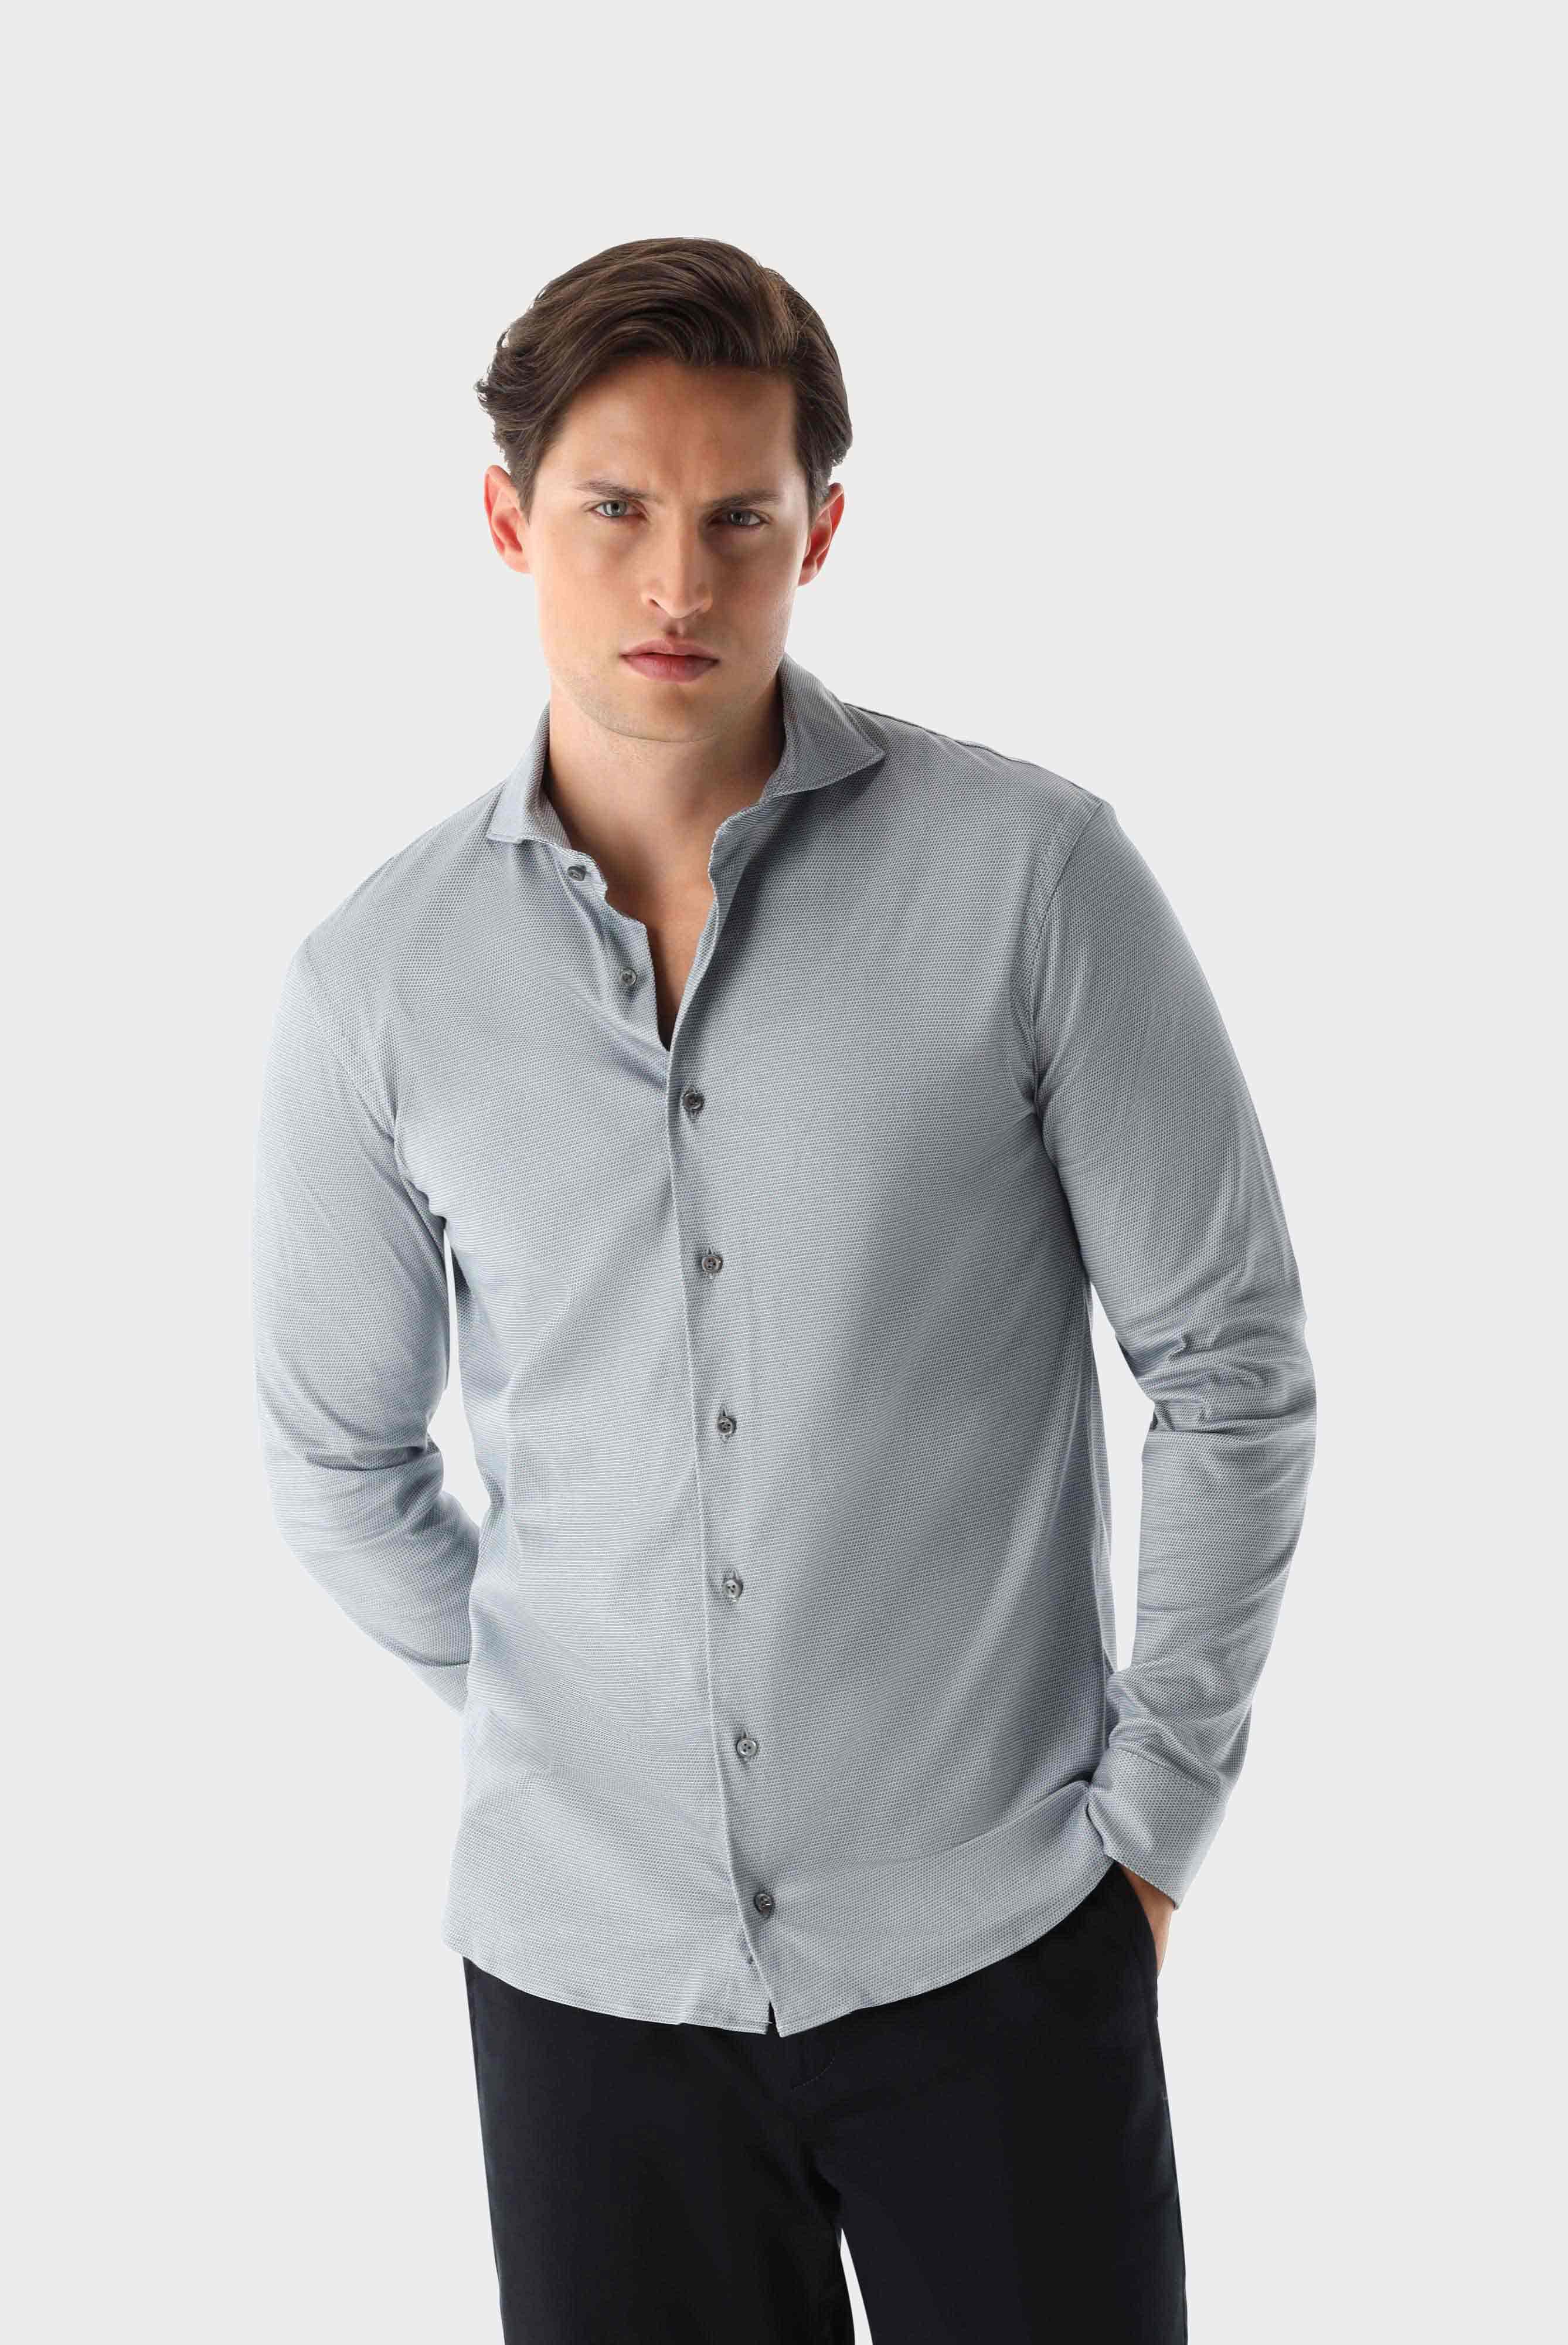 Casual Shirts+Micro Printed Jersey Shirt Tailor Fit+20.1683.UC.187551.050.M